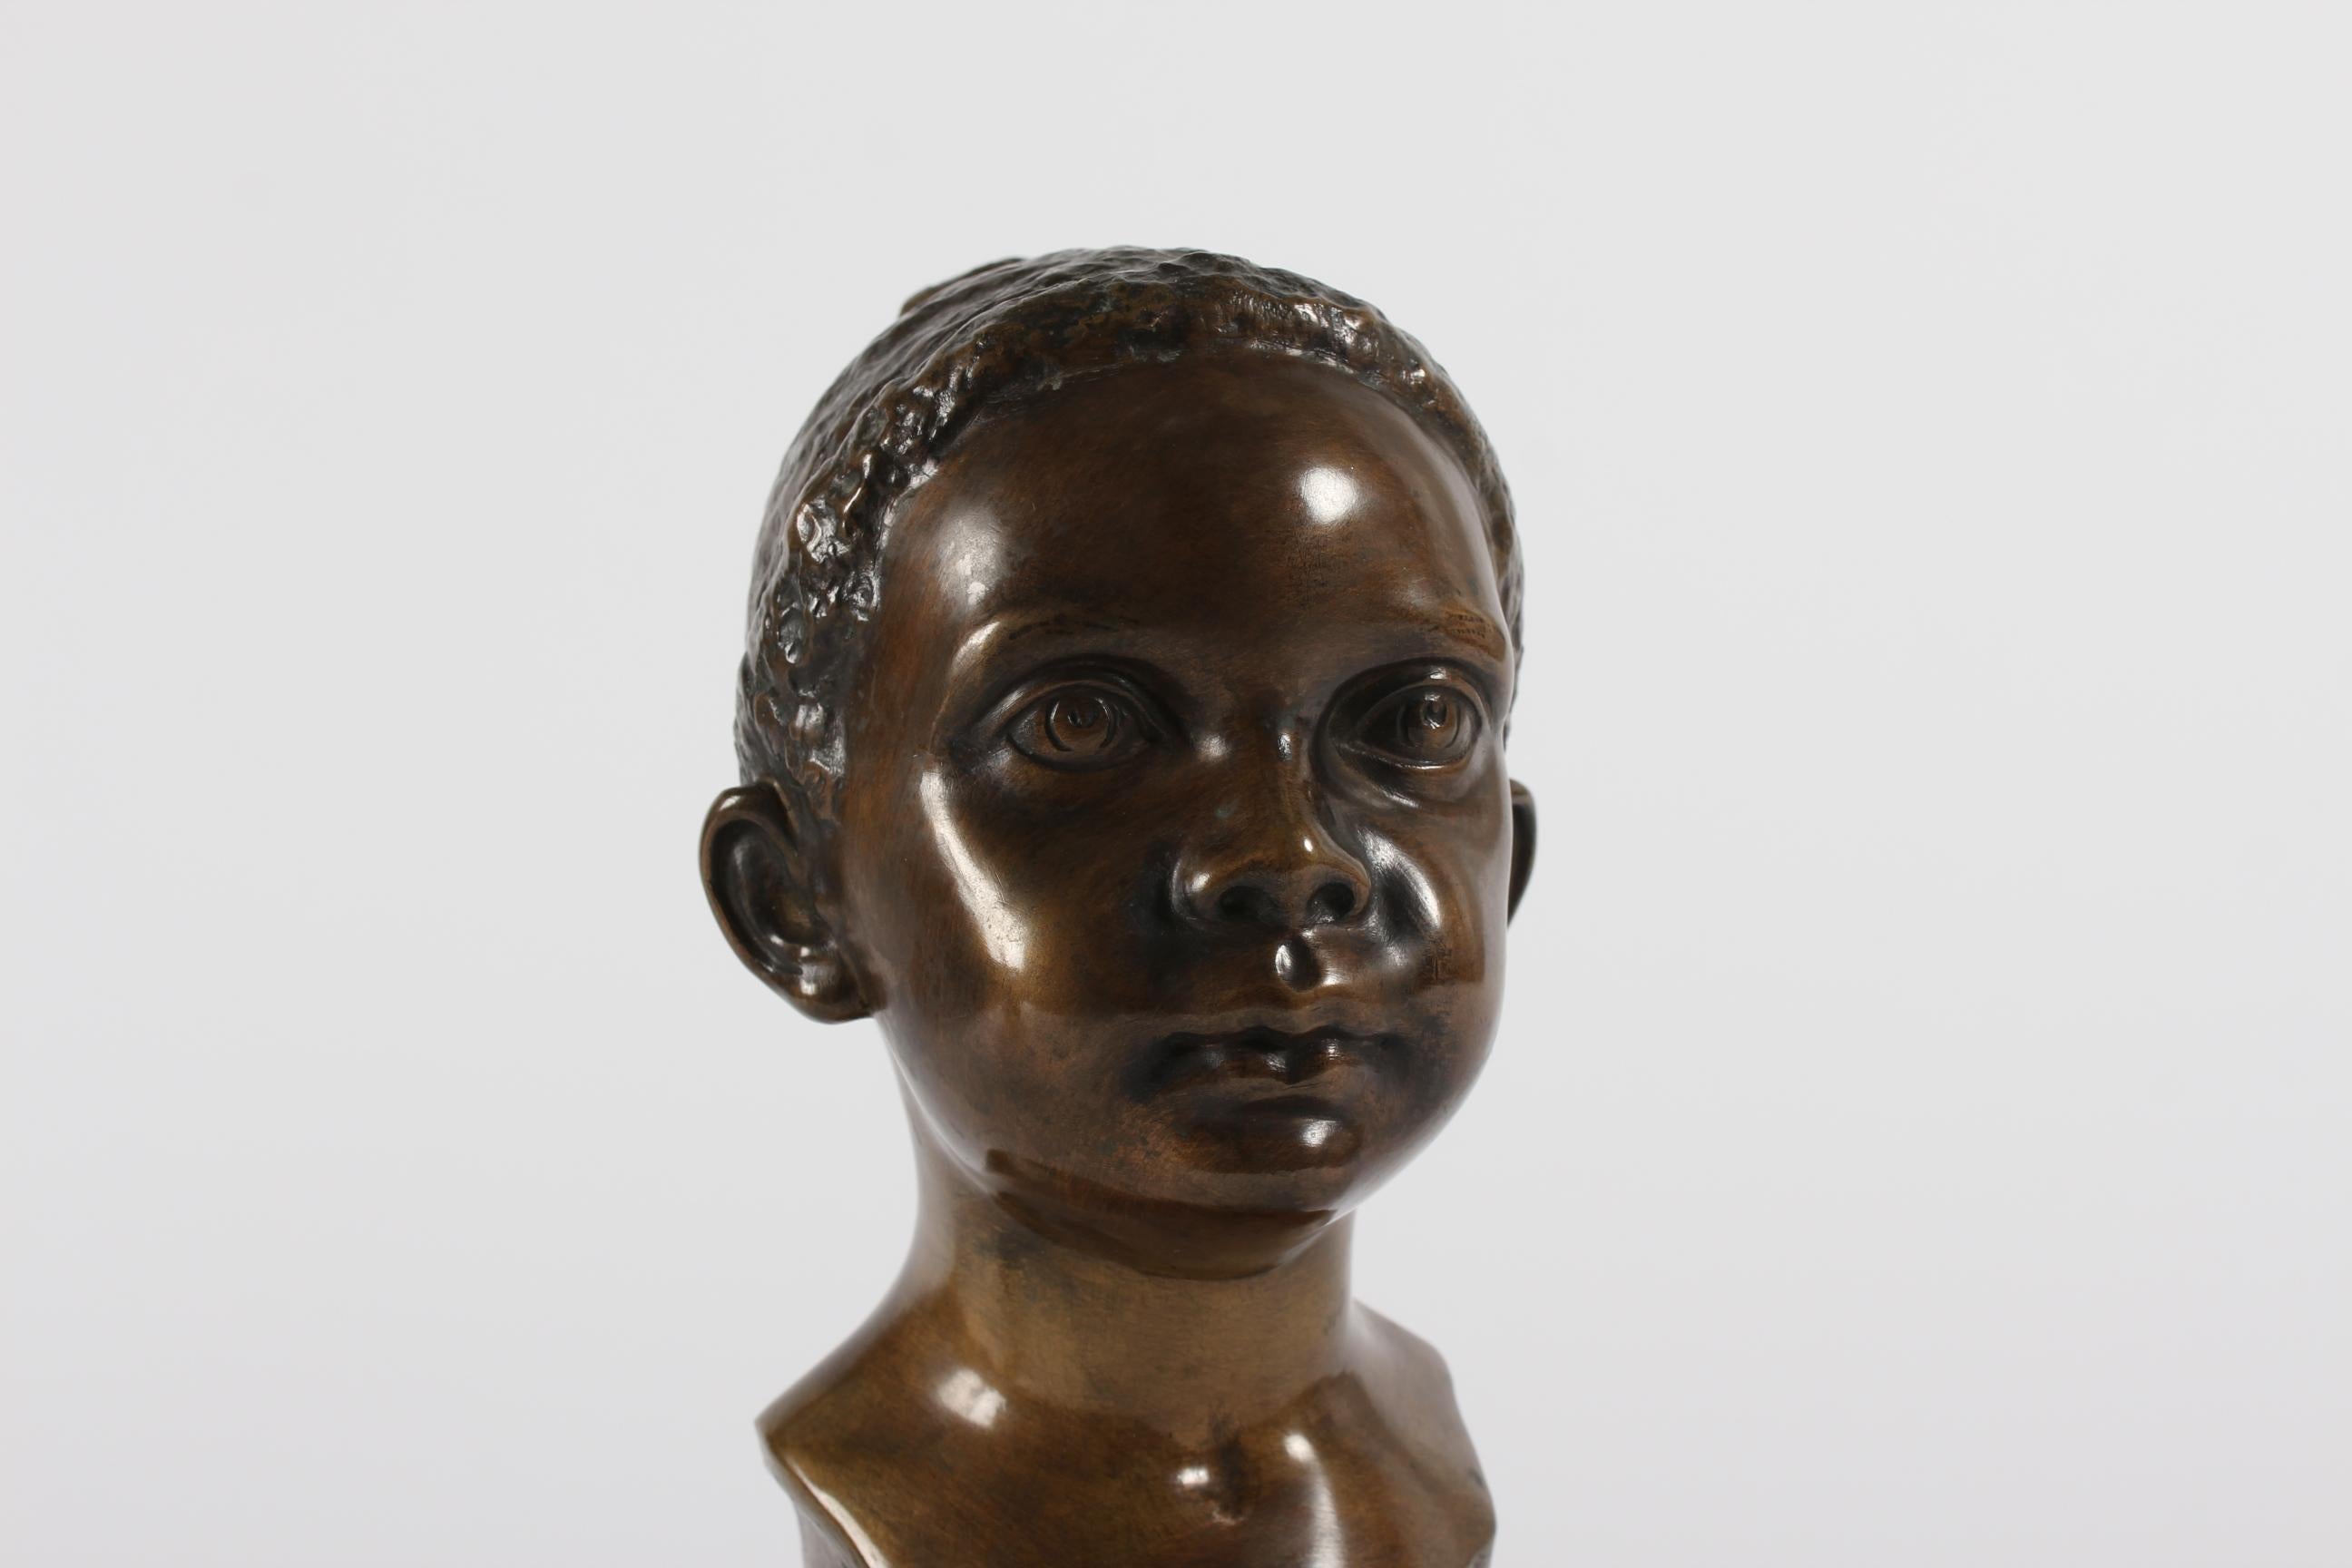 Original midcentury bust of young child designed by Danish artist and sculptor Elna Borch (1869-1950) made of bronze with brown patina.
It was manufactured circa 1940s or 1950s by bronze foundry L. Rasmussen in Copenhagen.

Sign. E. Borch + stamp